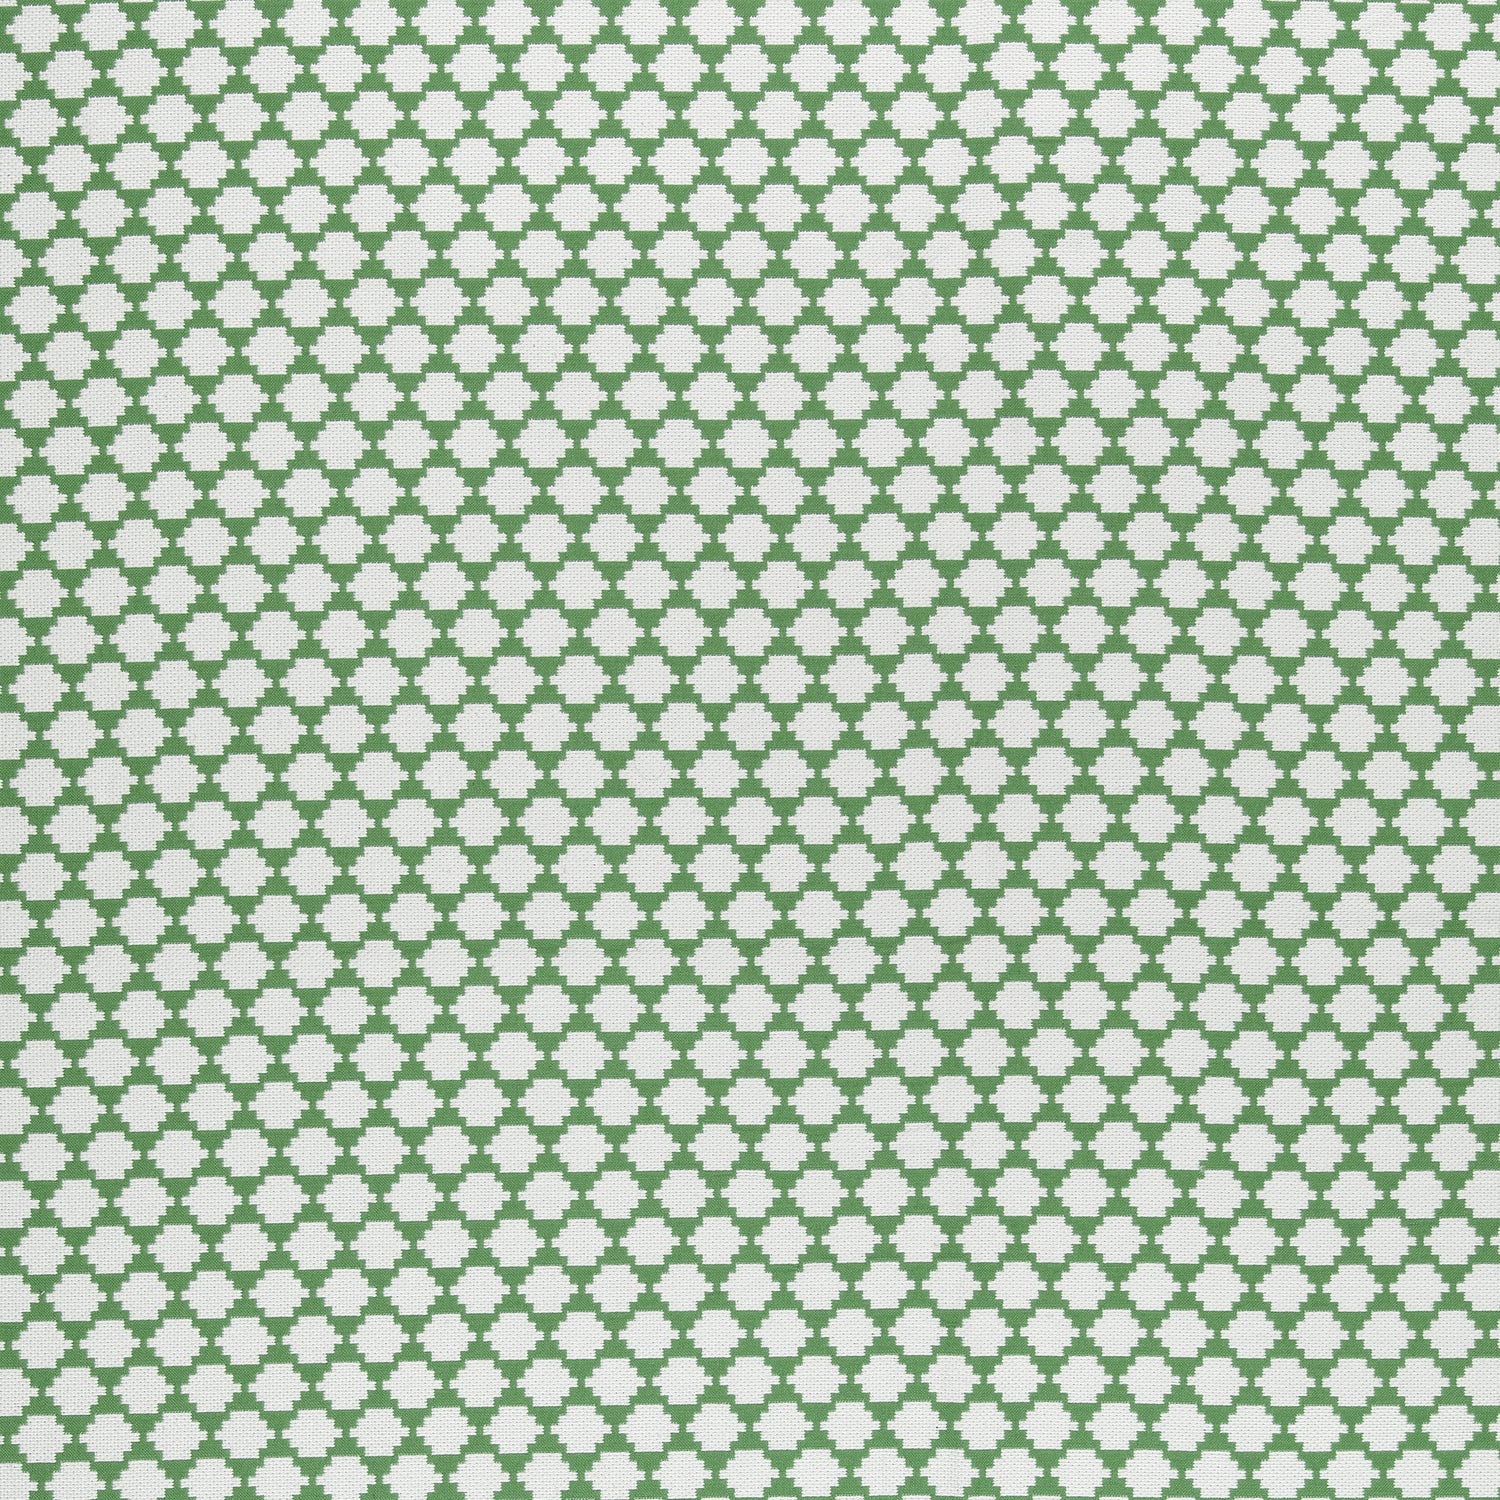 Bijou fabric in green color - pattern number W775452 - by Thibaut in the Dynasty collection